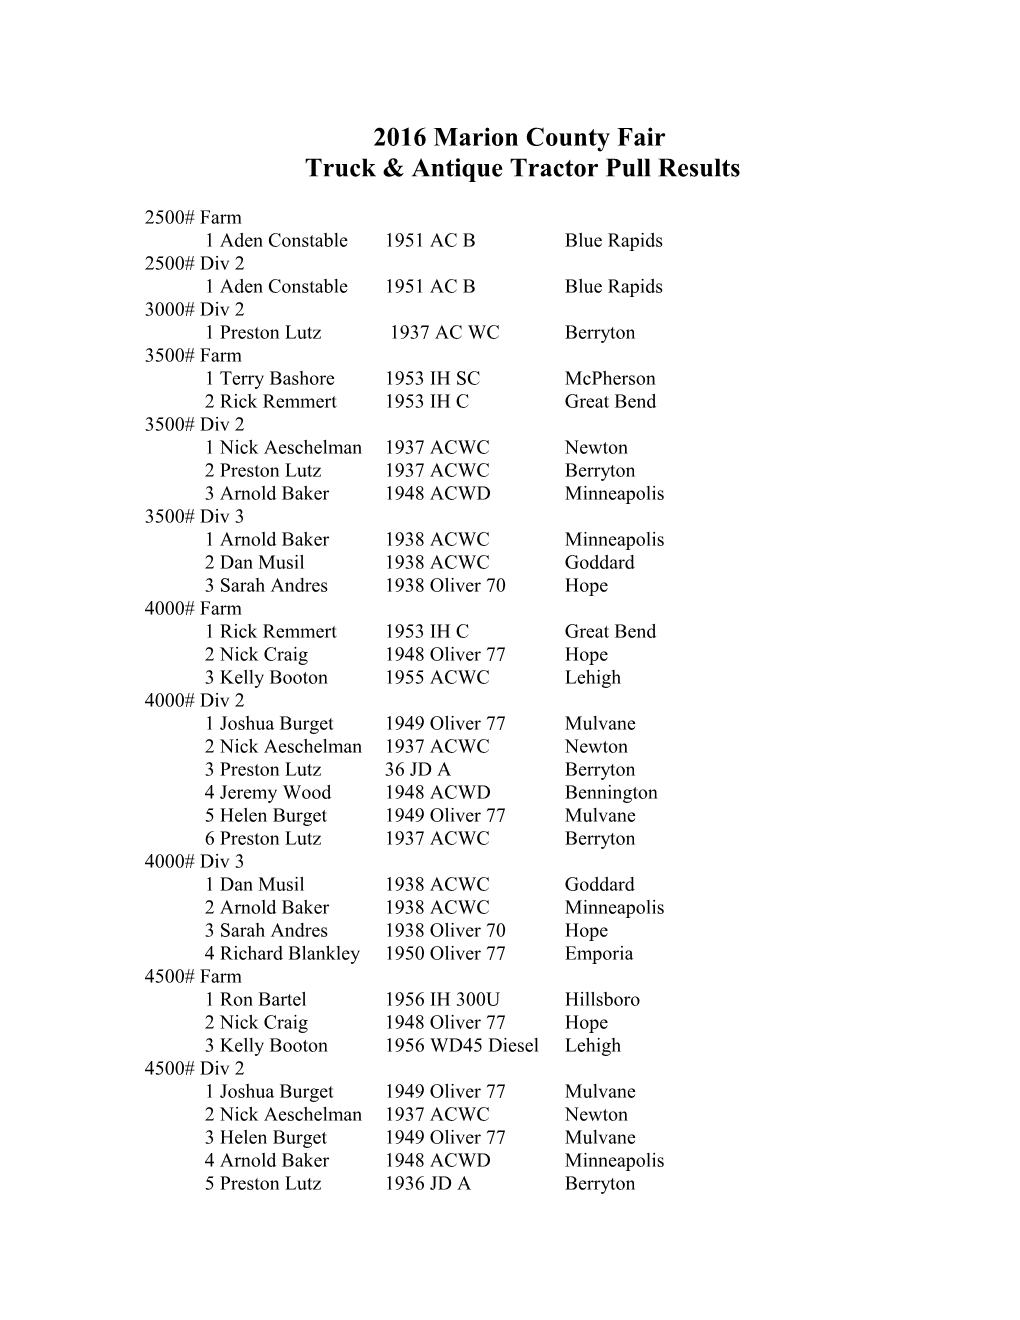 Truck & Antique Tractor Pull Results